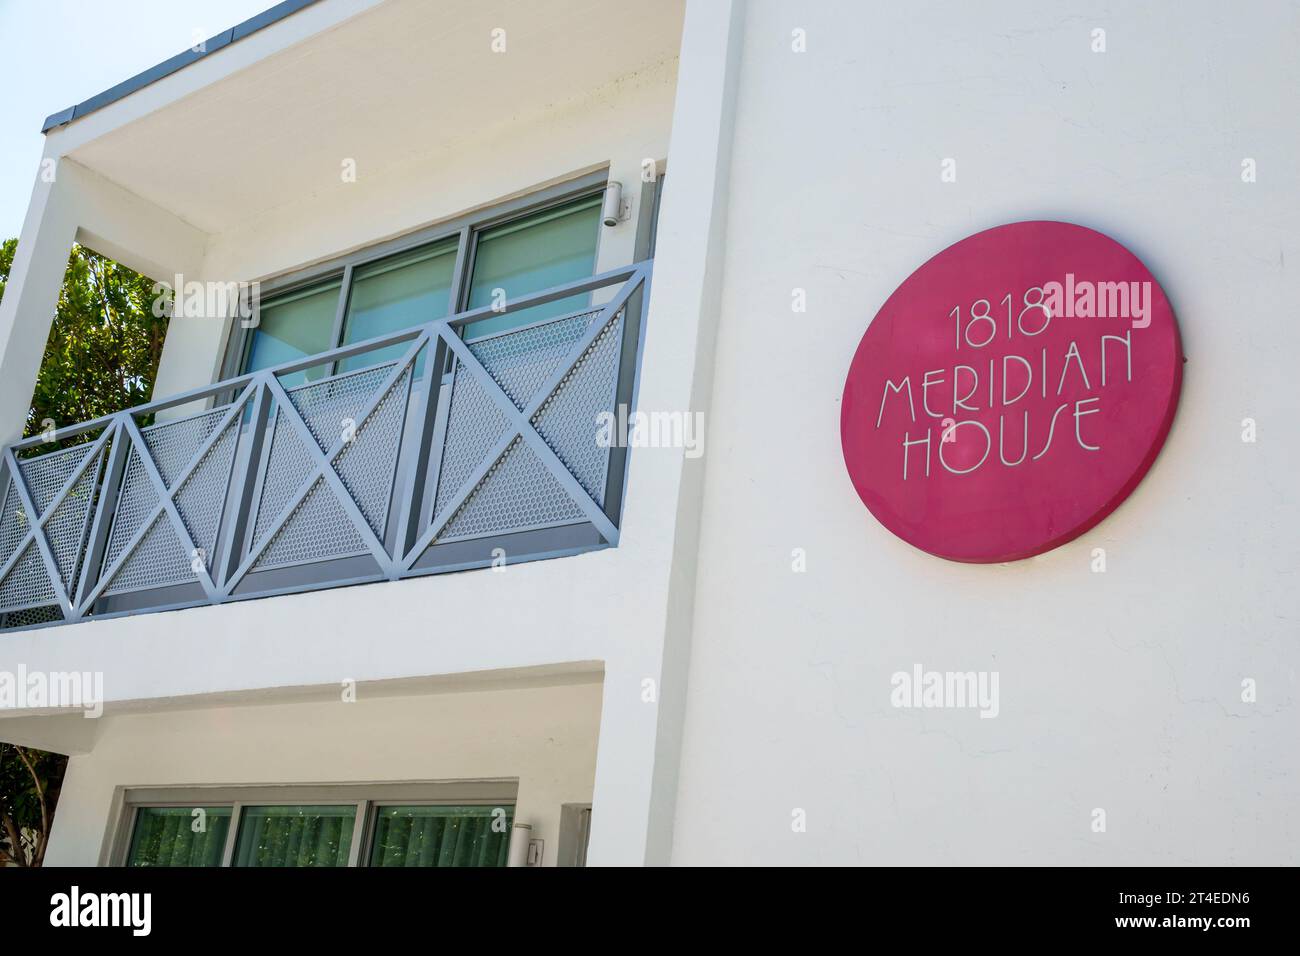 Miami Beach Florida,outside exterior,building front entrance hotel,1818 Meridian House by Eskape Collection sign,hotels motels businesses Stock Photo